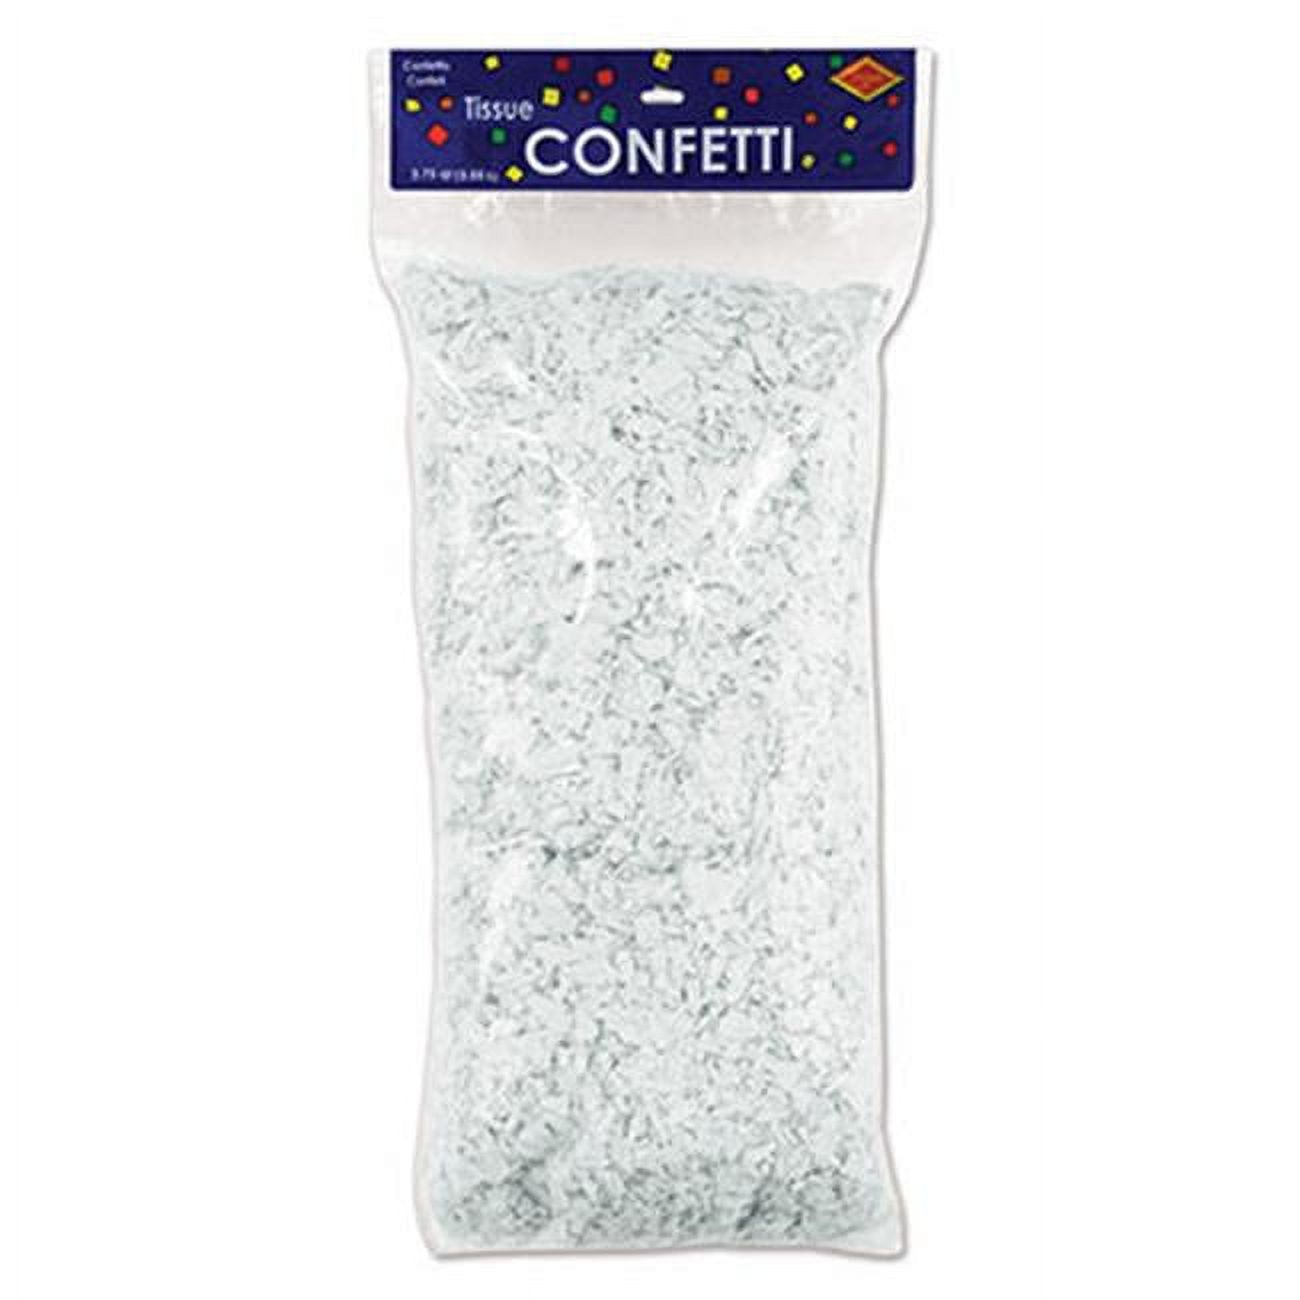 Picture of Beistle 59971-W Tissue Confetti, White - Pack of 6